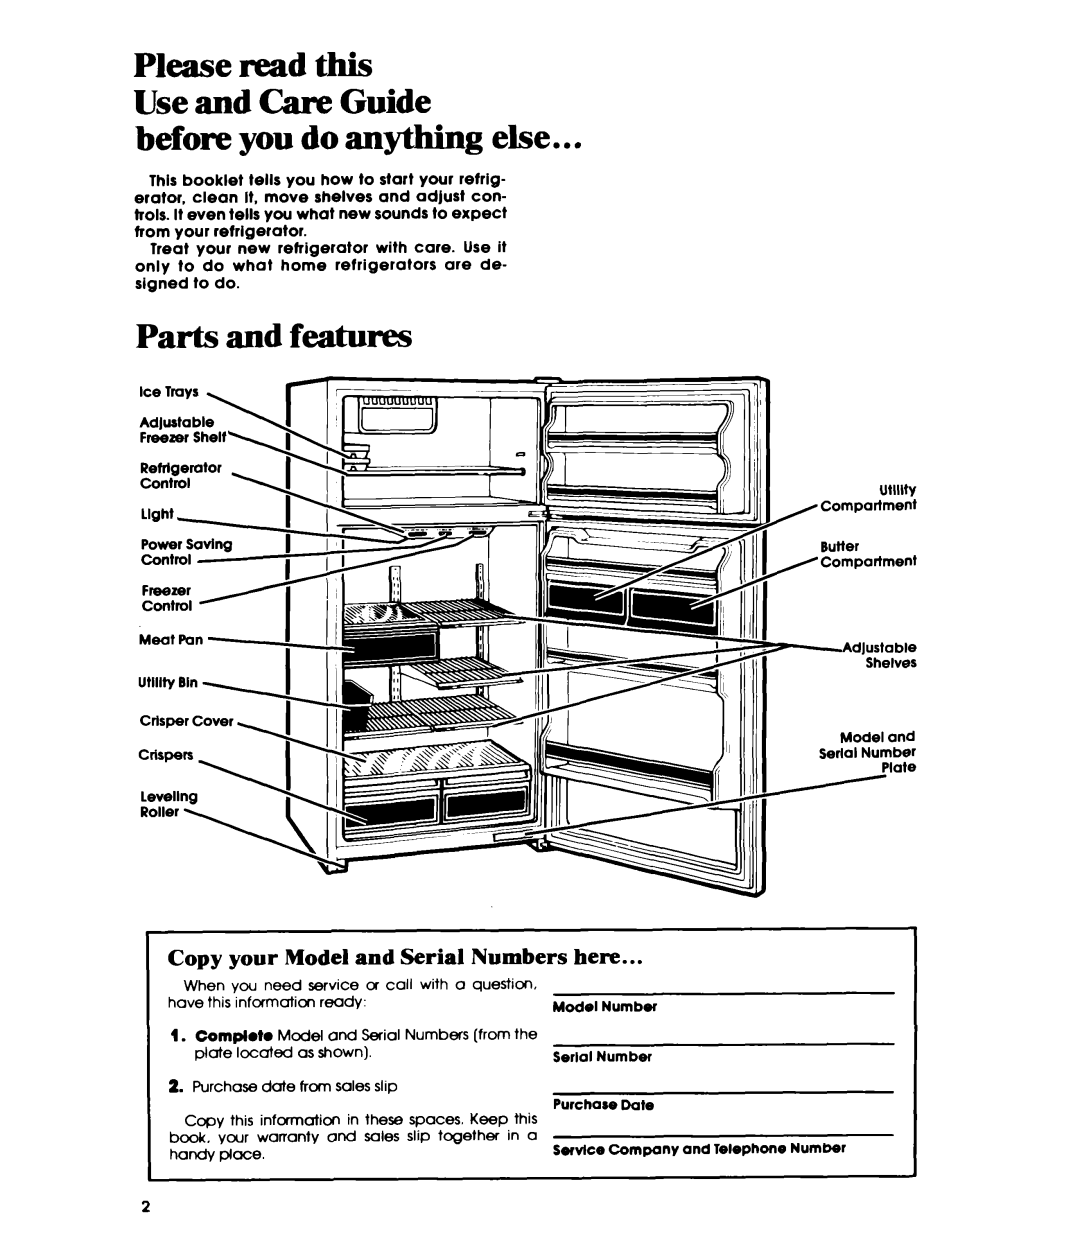 Whirlpool ETl8EK manual before you do anything else, Parts and features, Please read this Use and Care Guide, ===i= iIyUJ 